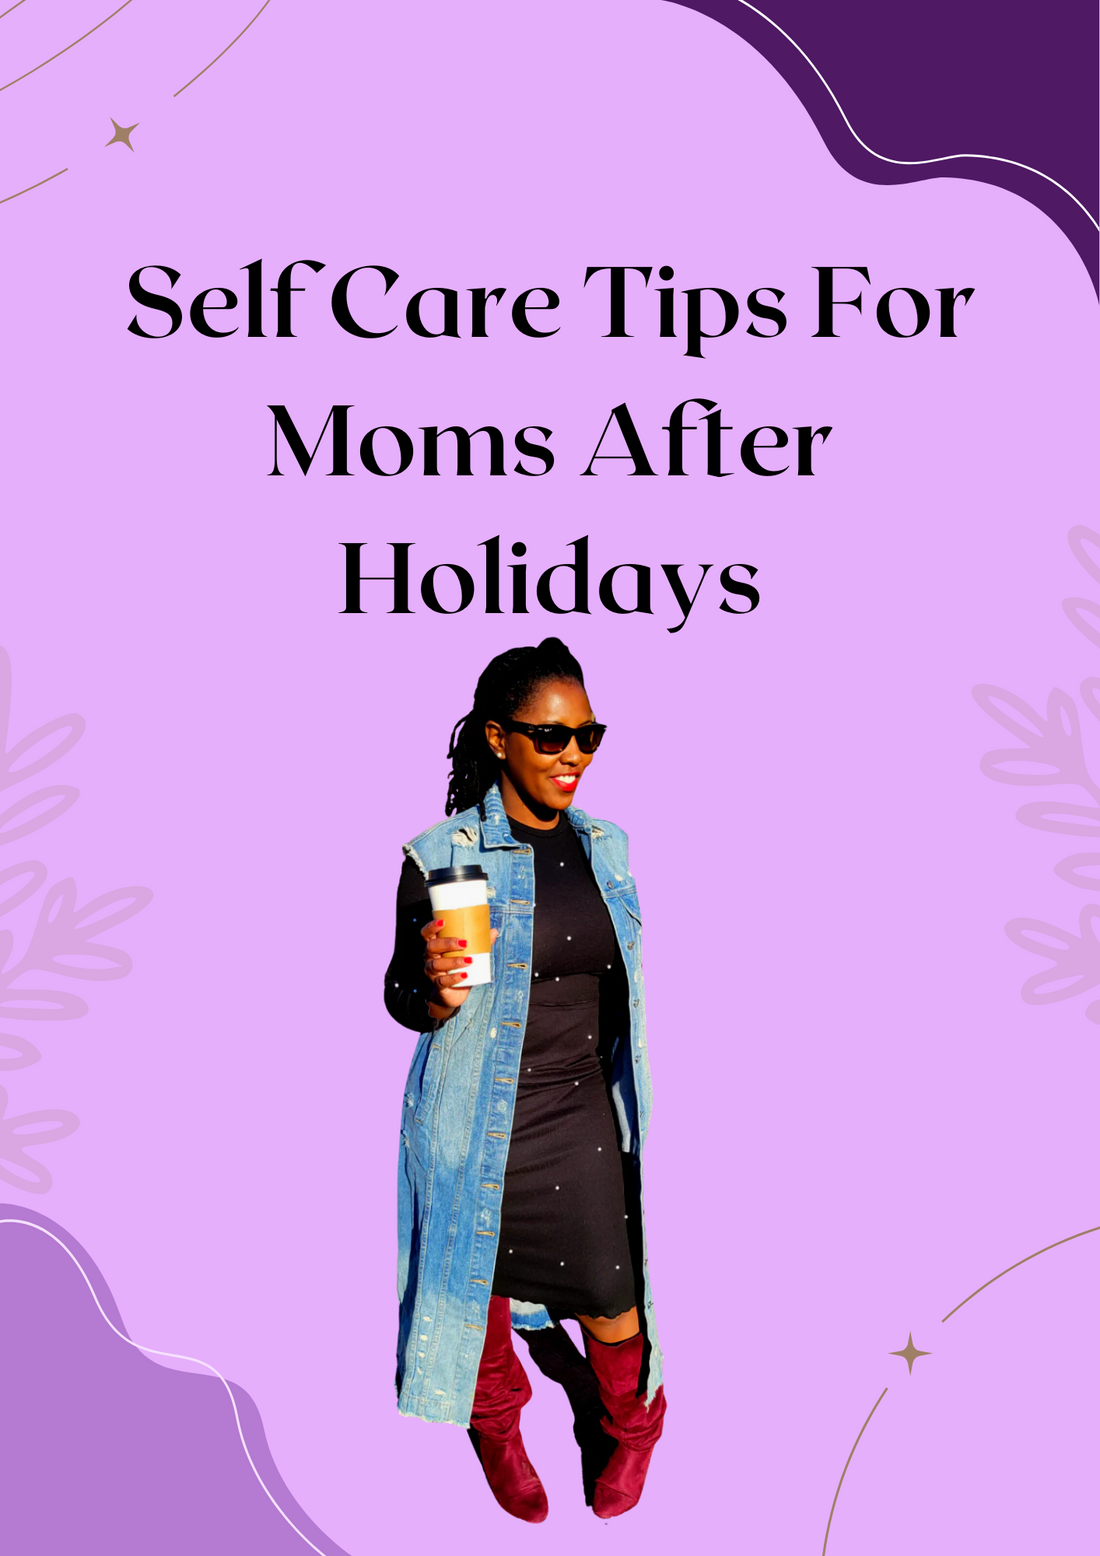 Self Care Tips For Moms After Holidays